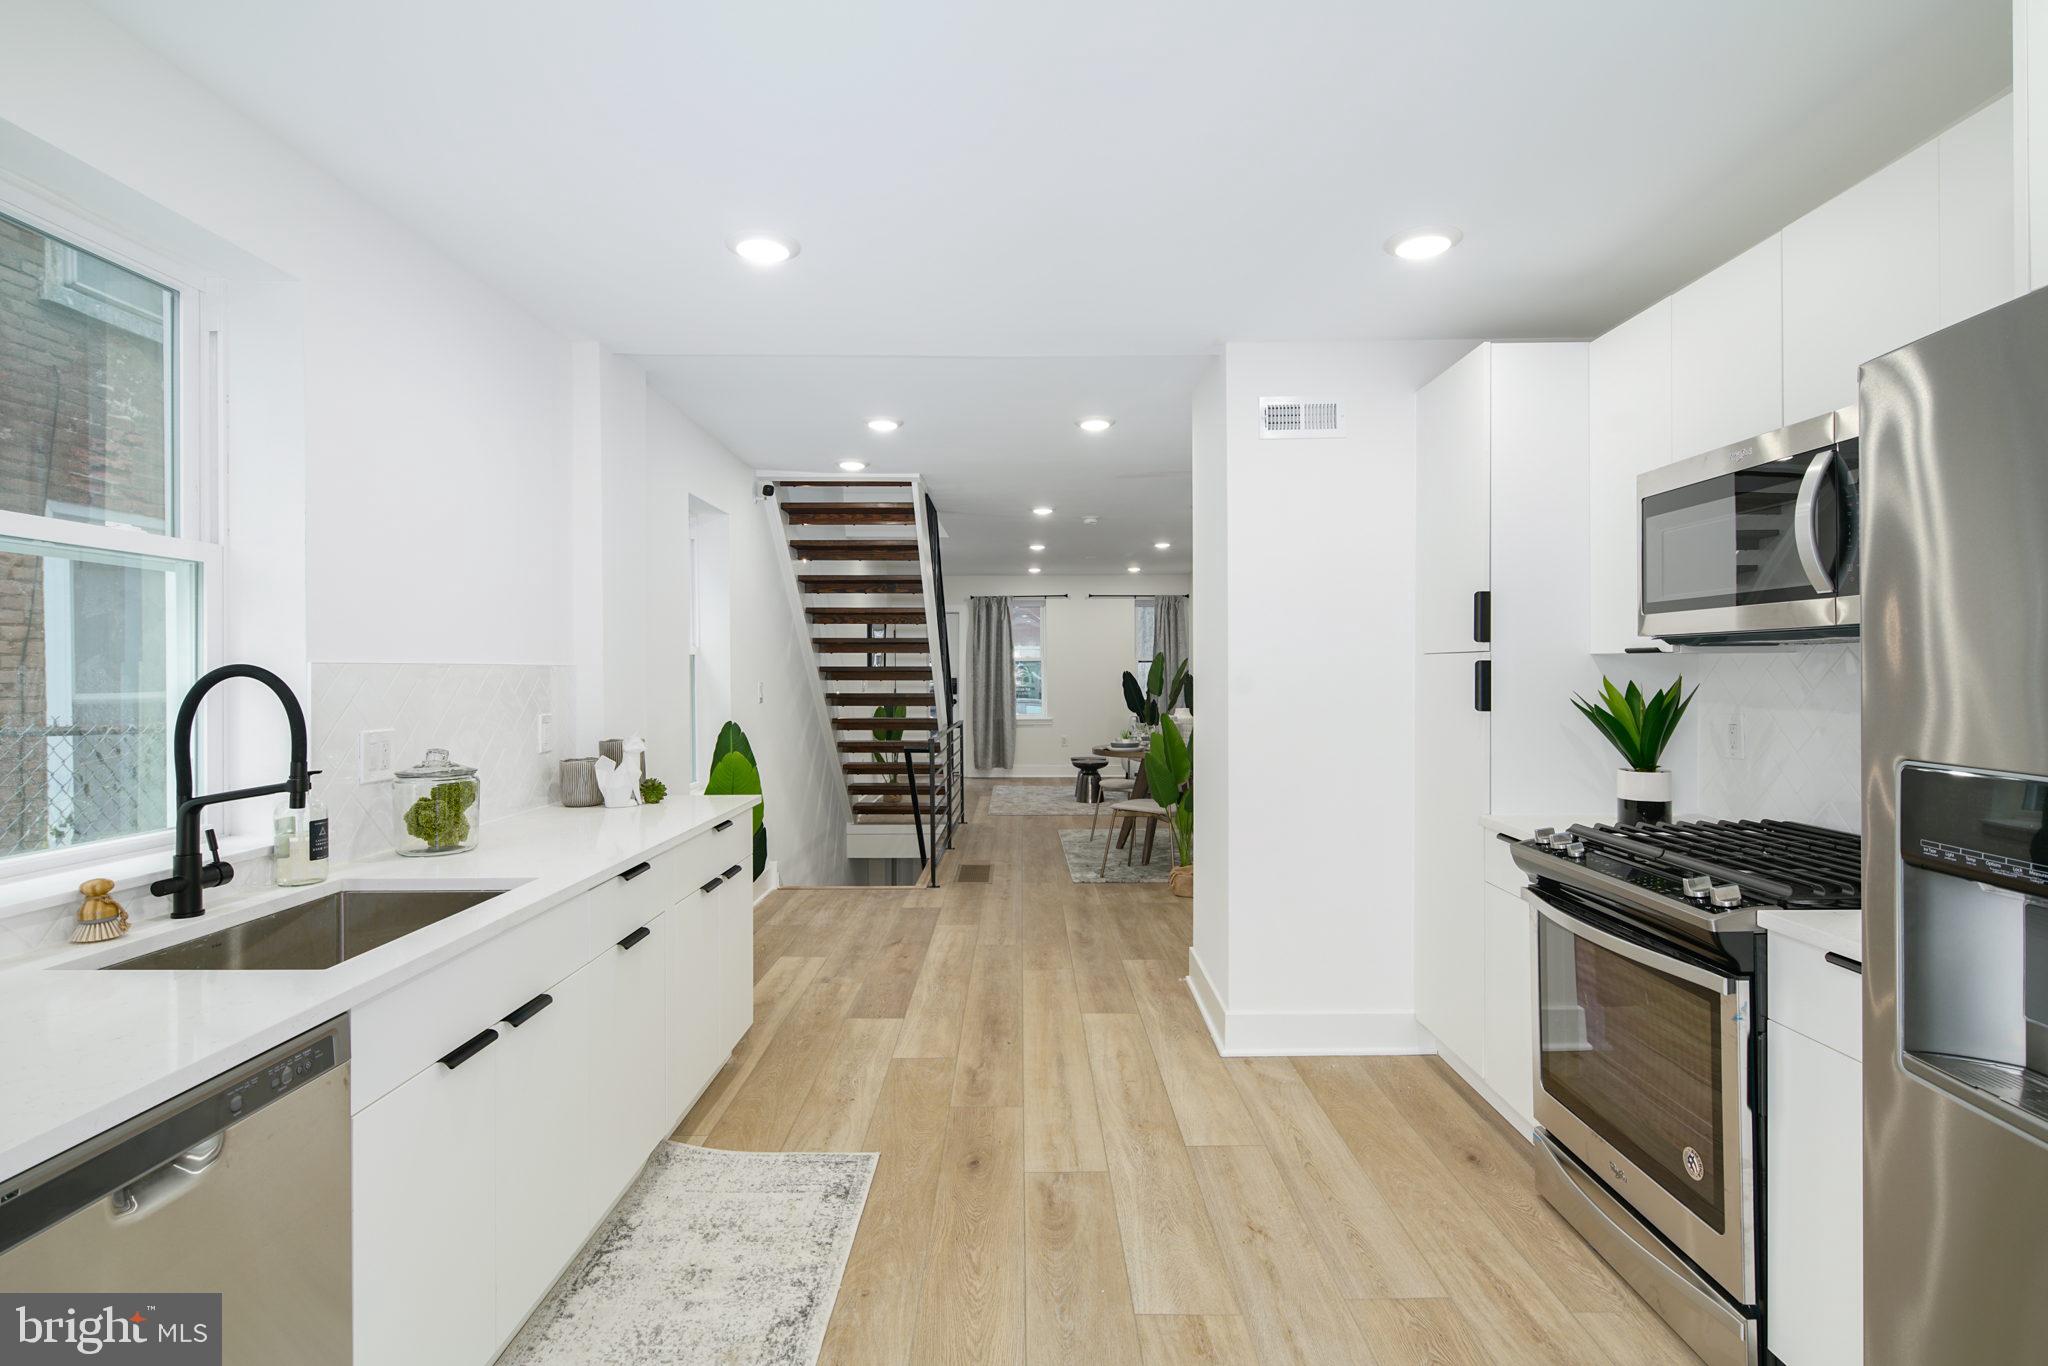 a kitchen with stainless steel appliances a stove refrigerator and a wooden floor